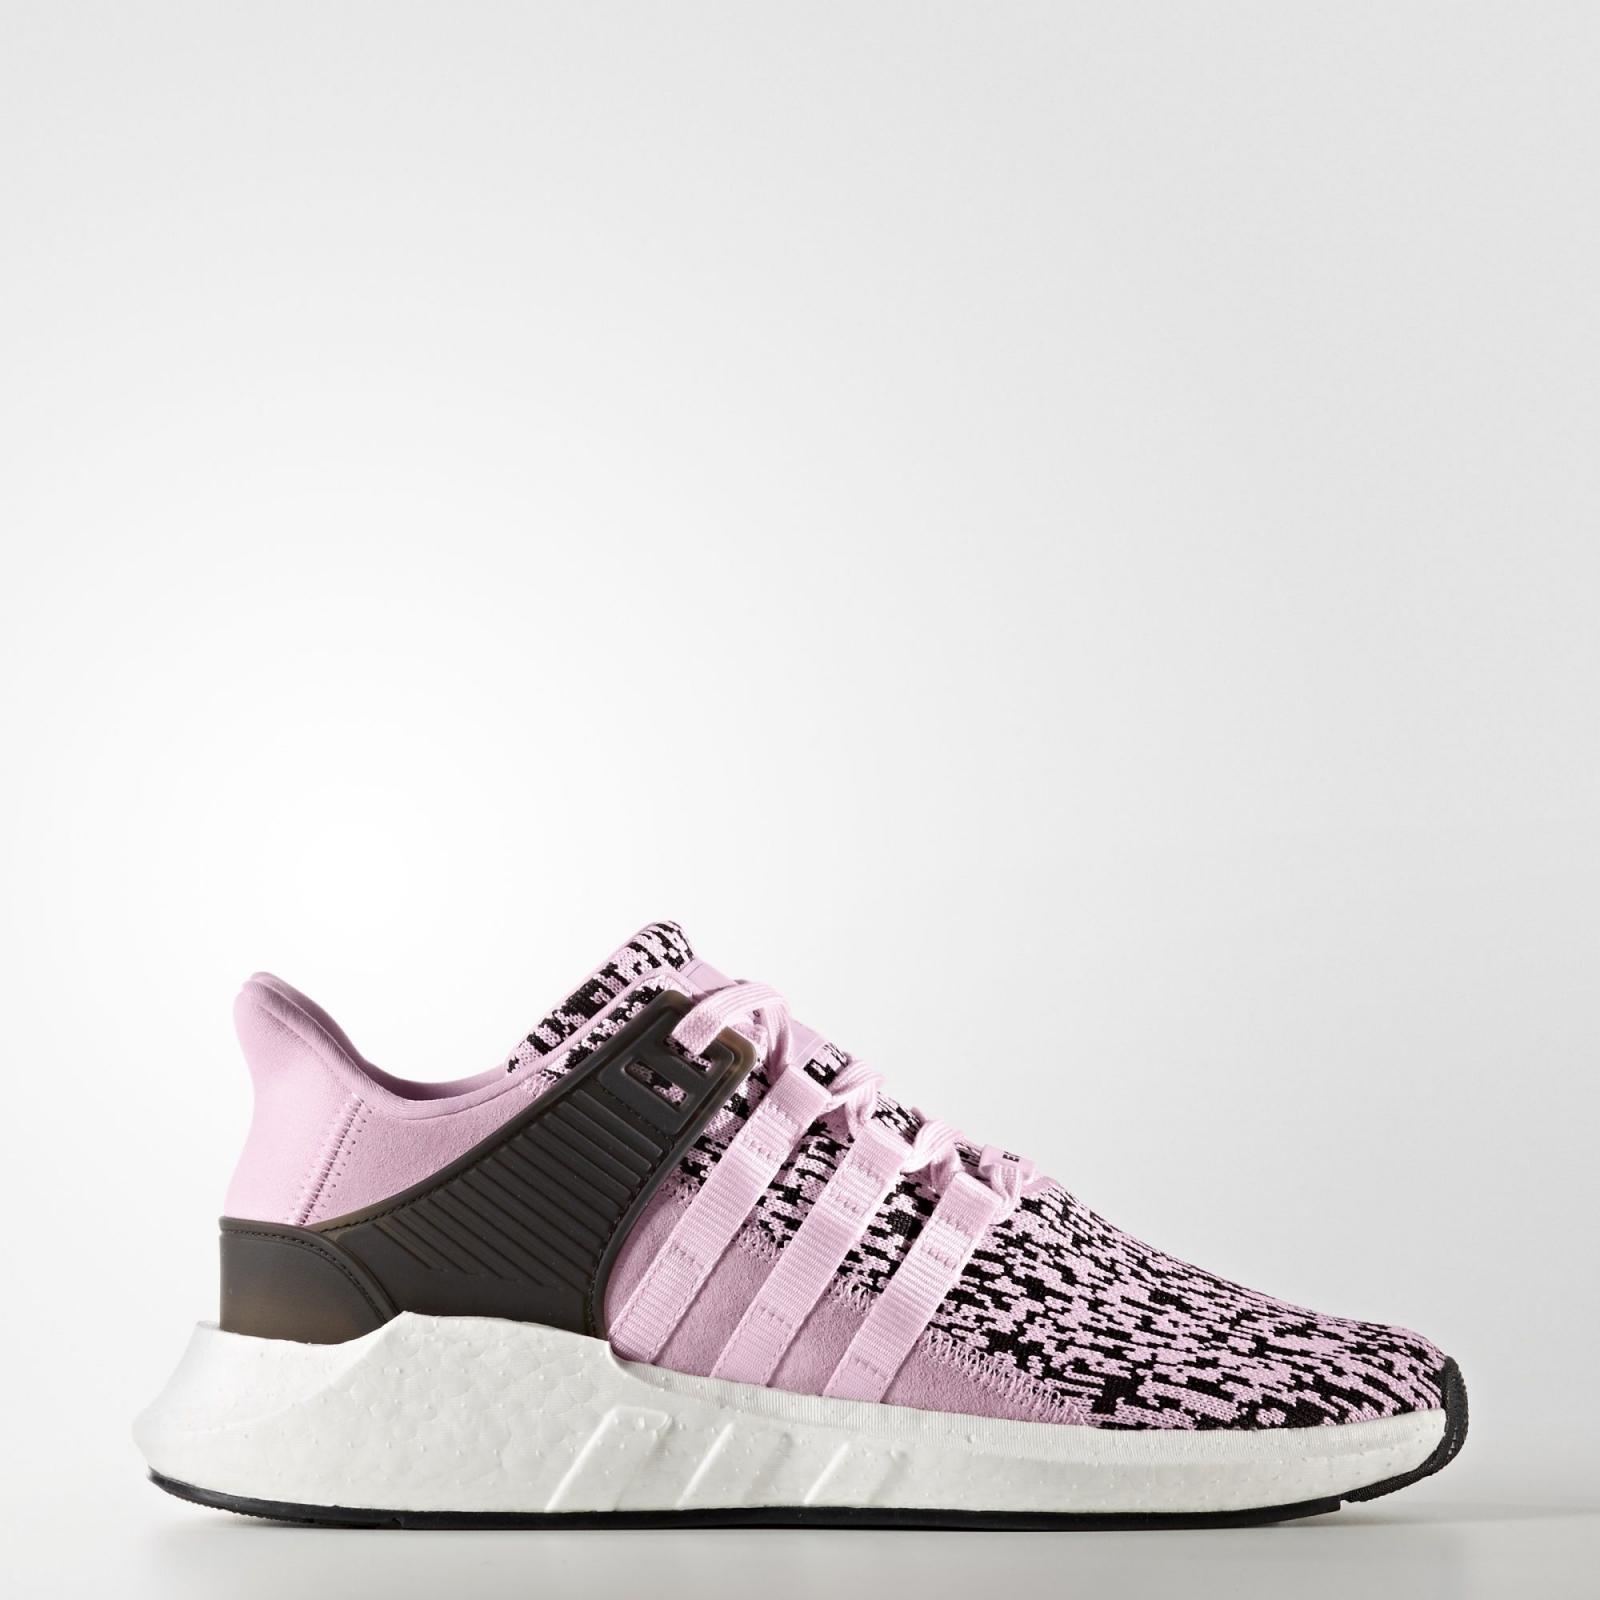 ADIDAS EQT SUPPORT 93/17 MUJER